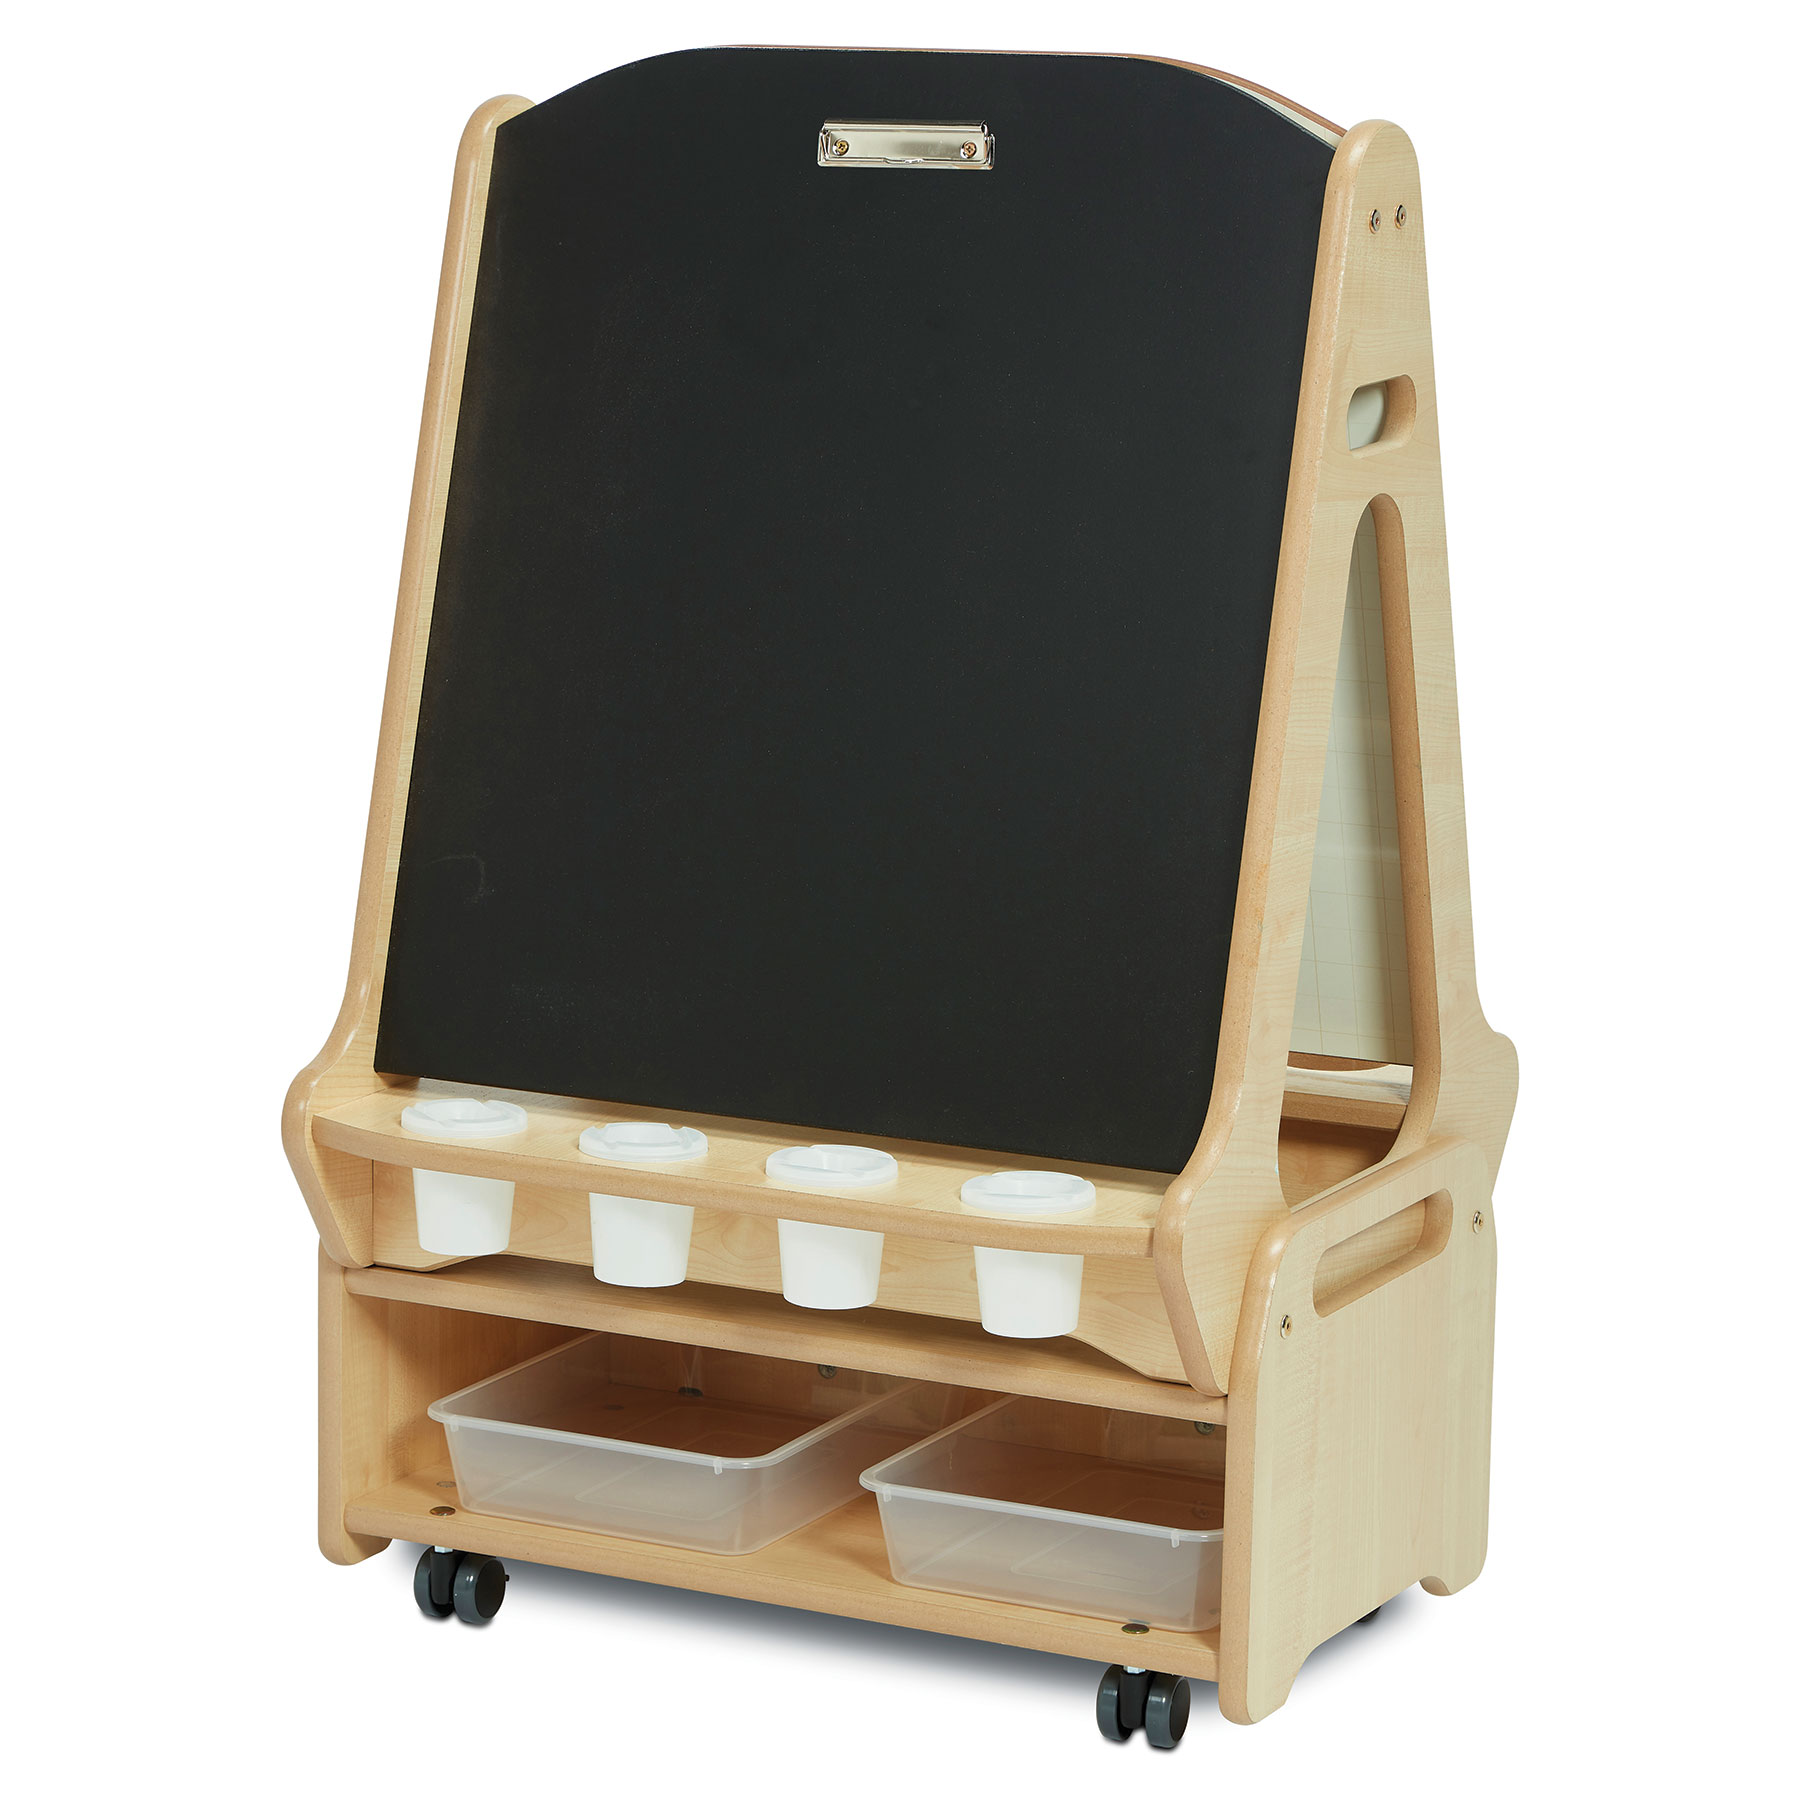 Double-Sided 2 Station Chalk/Whiteboard Easel with Low Storage Trolley